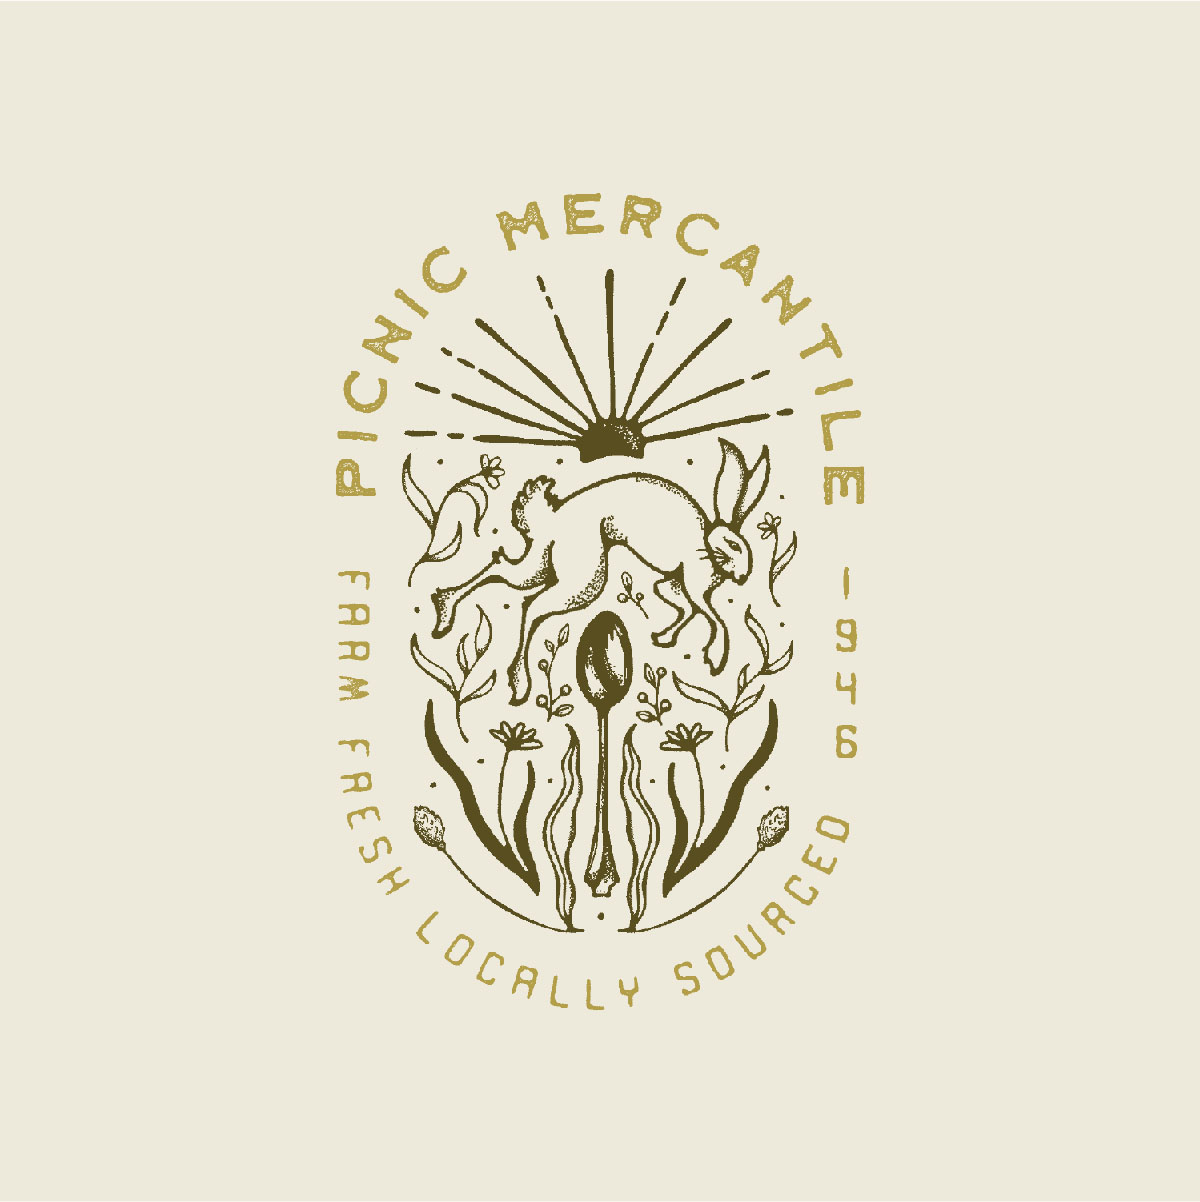 a logo for a company called Picnic Mercantile has an oval illustration of a rabbit jumping over a spoon